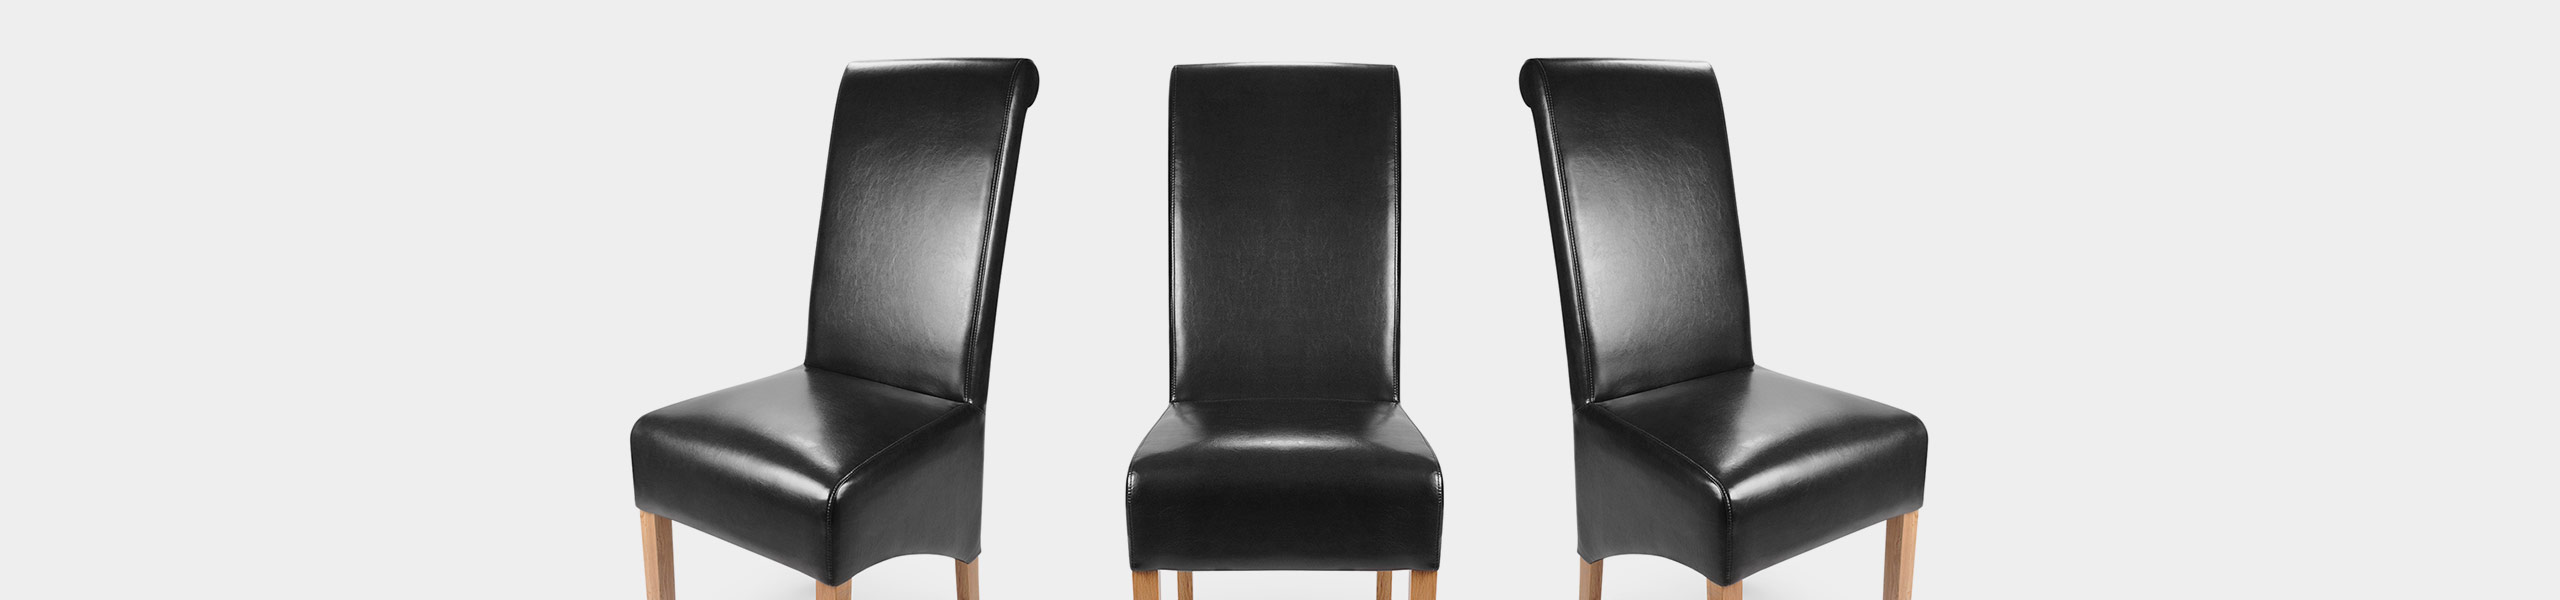 Krista Dining Chair Black Leather Video Banner